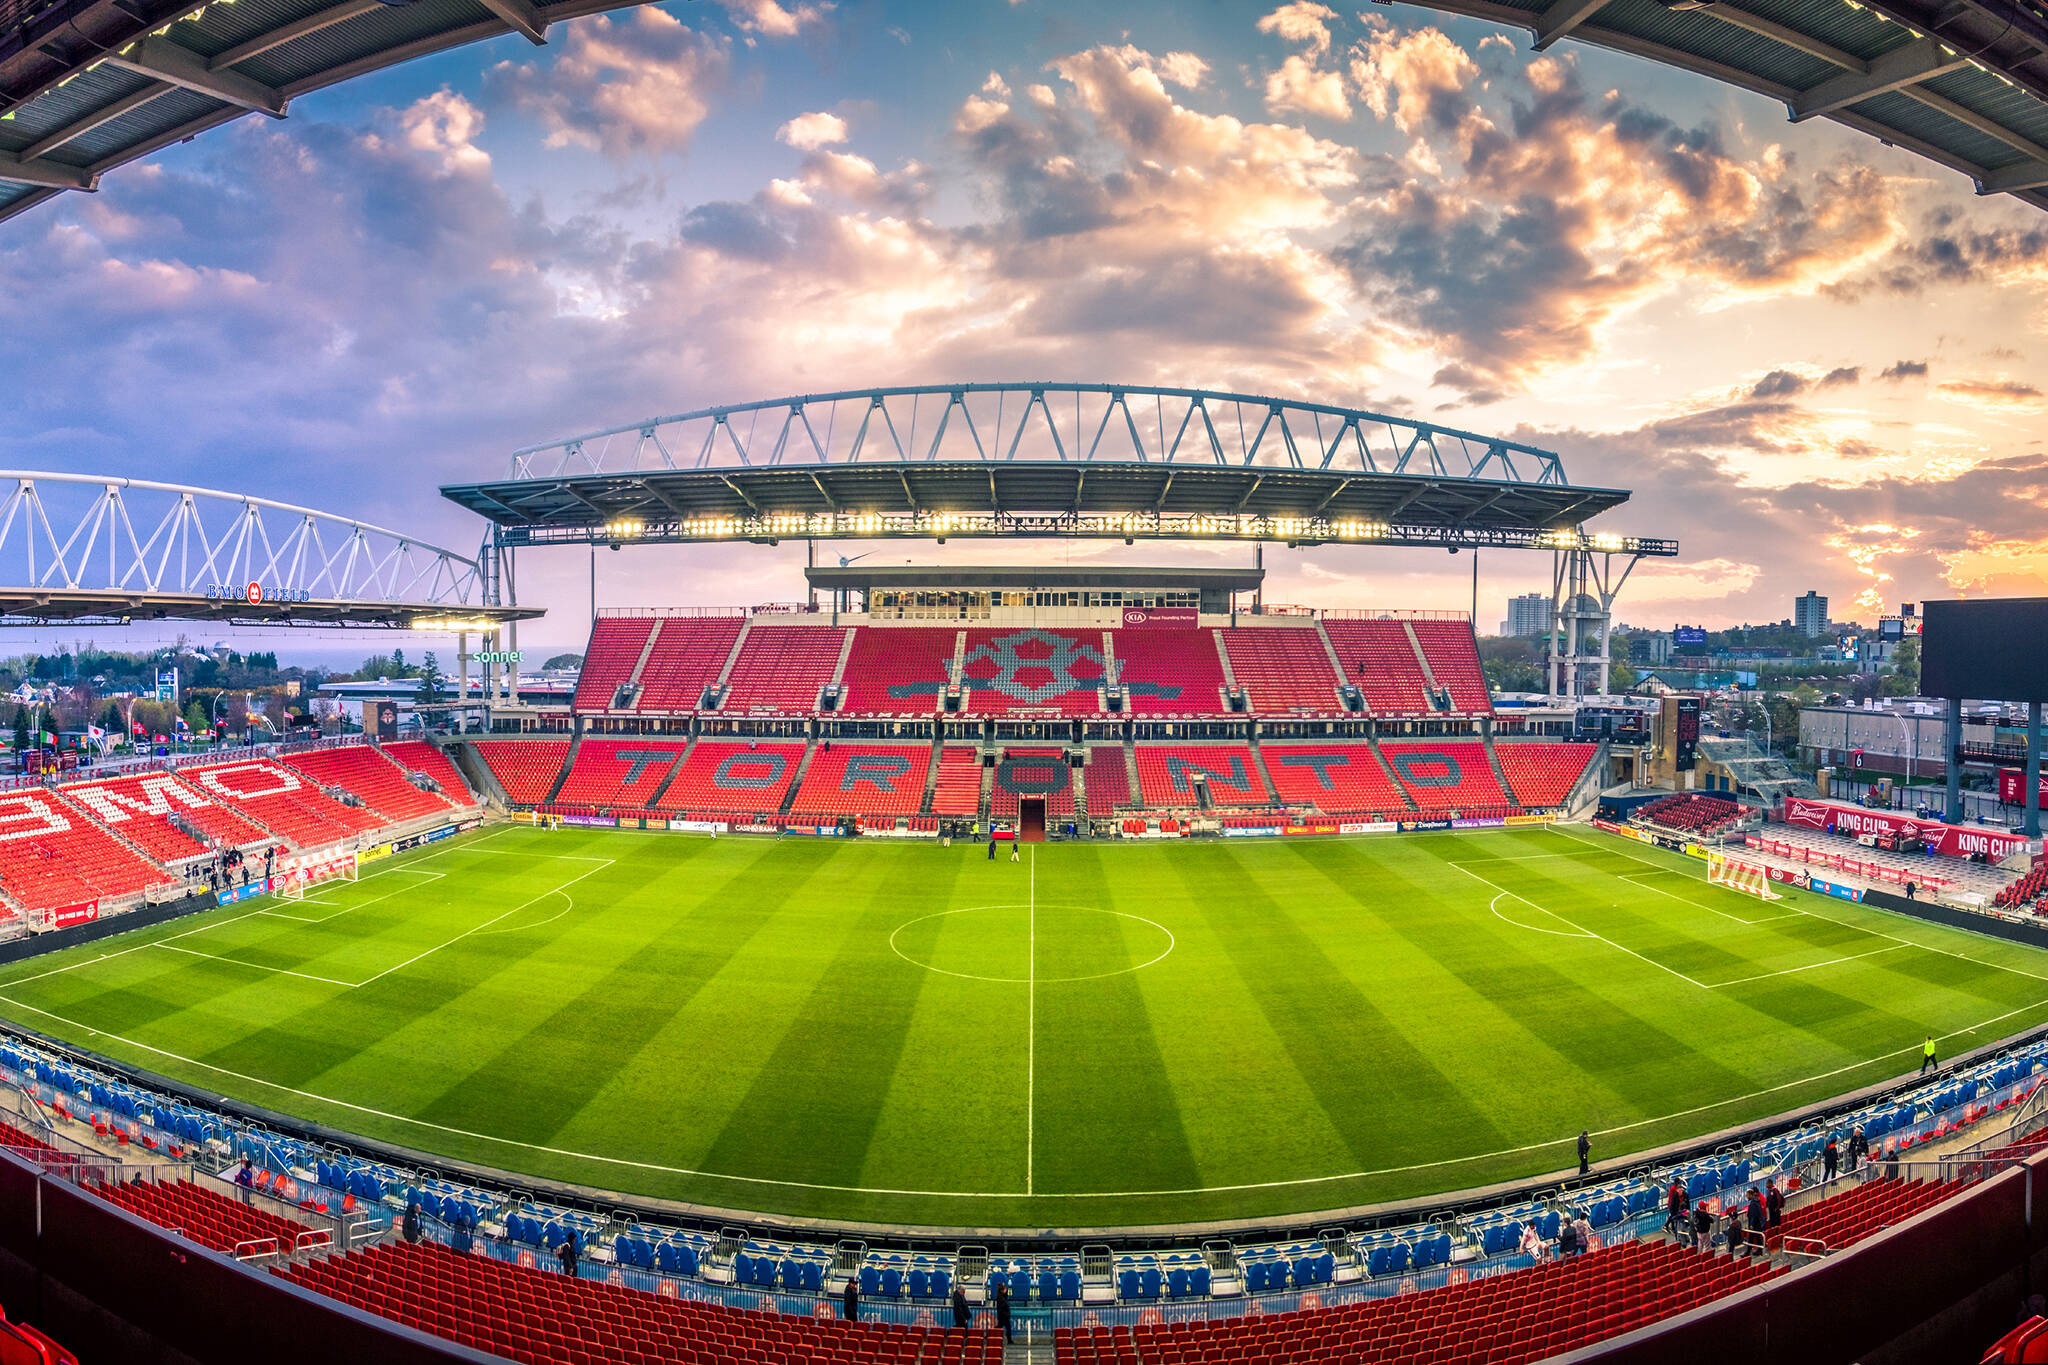 Toronto FC officially allowed to start playing home games at BMO Field again